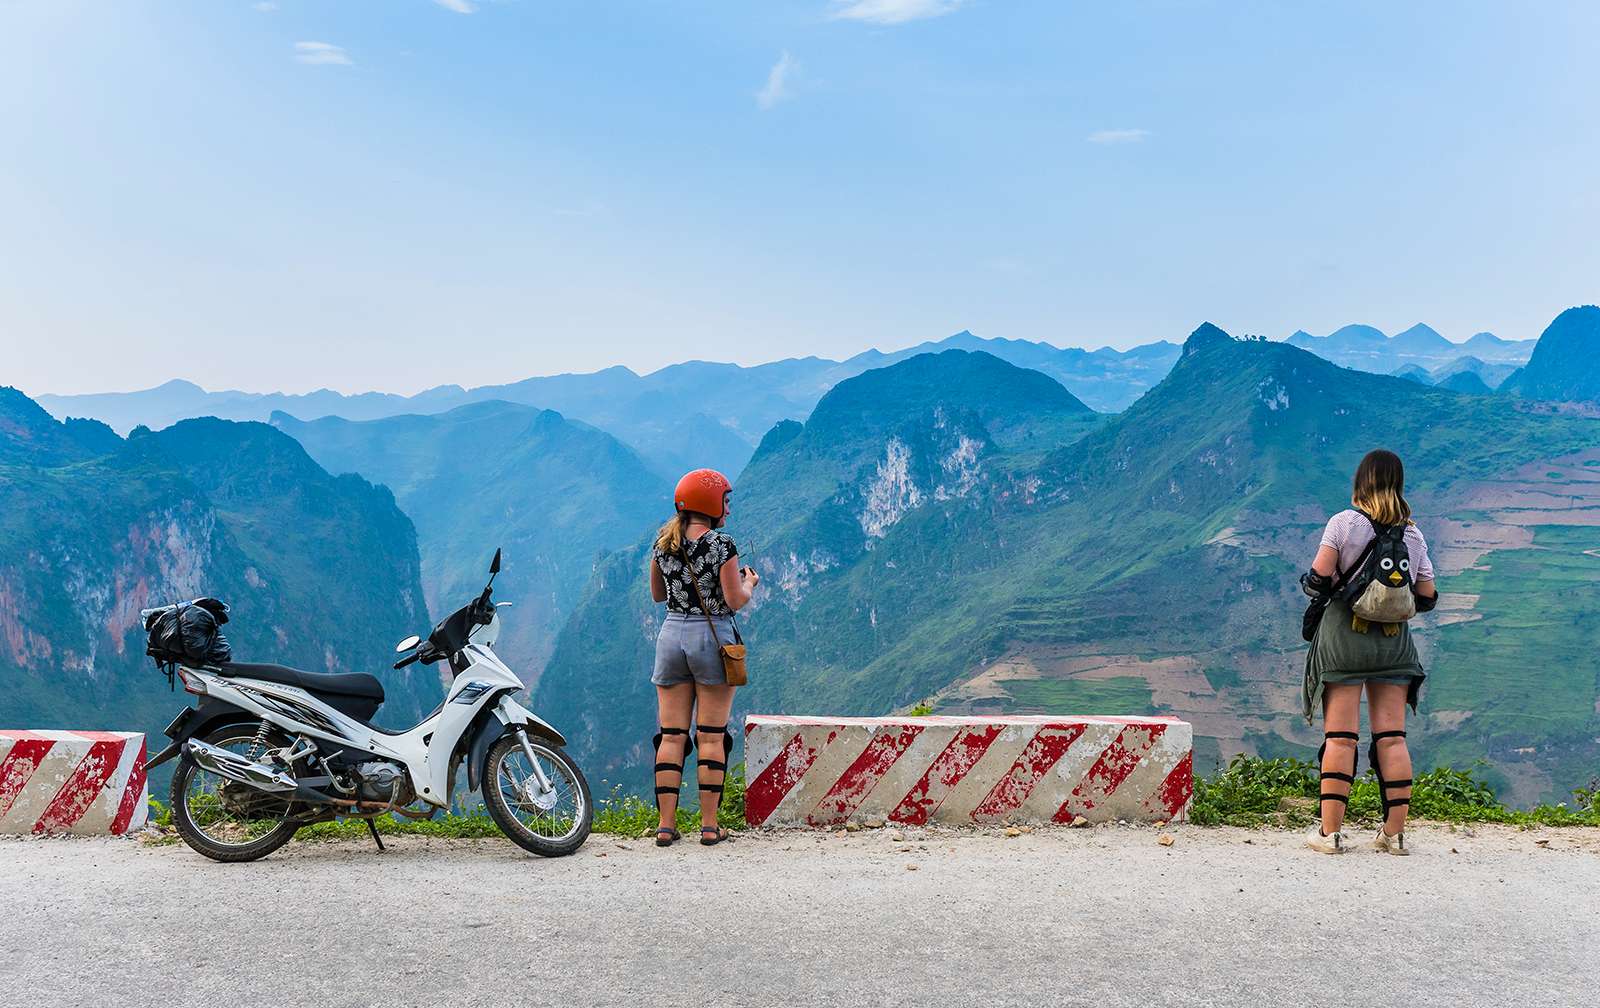 Things to do in Ha Giang